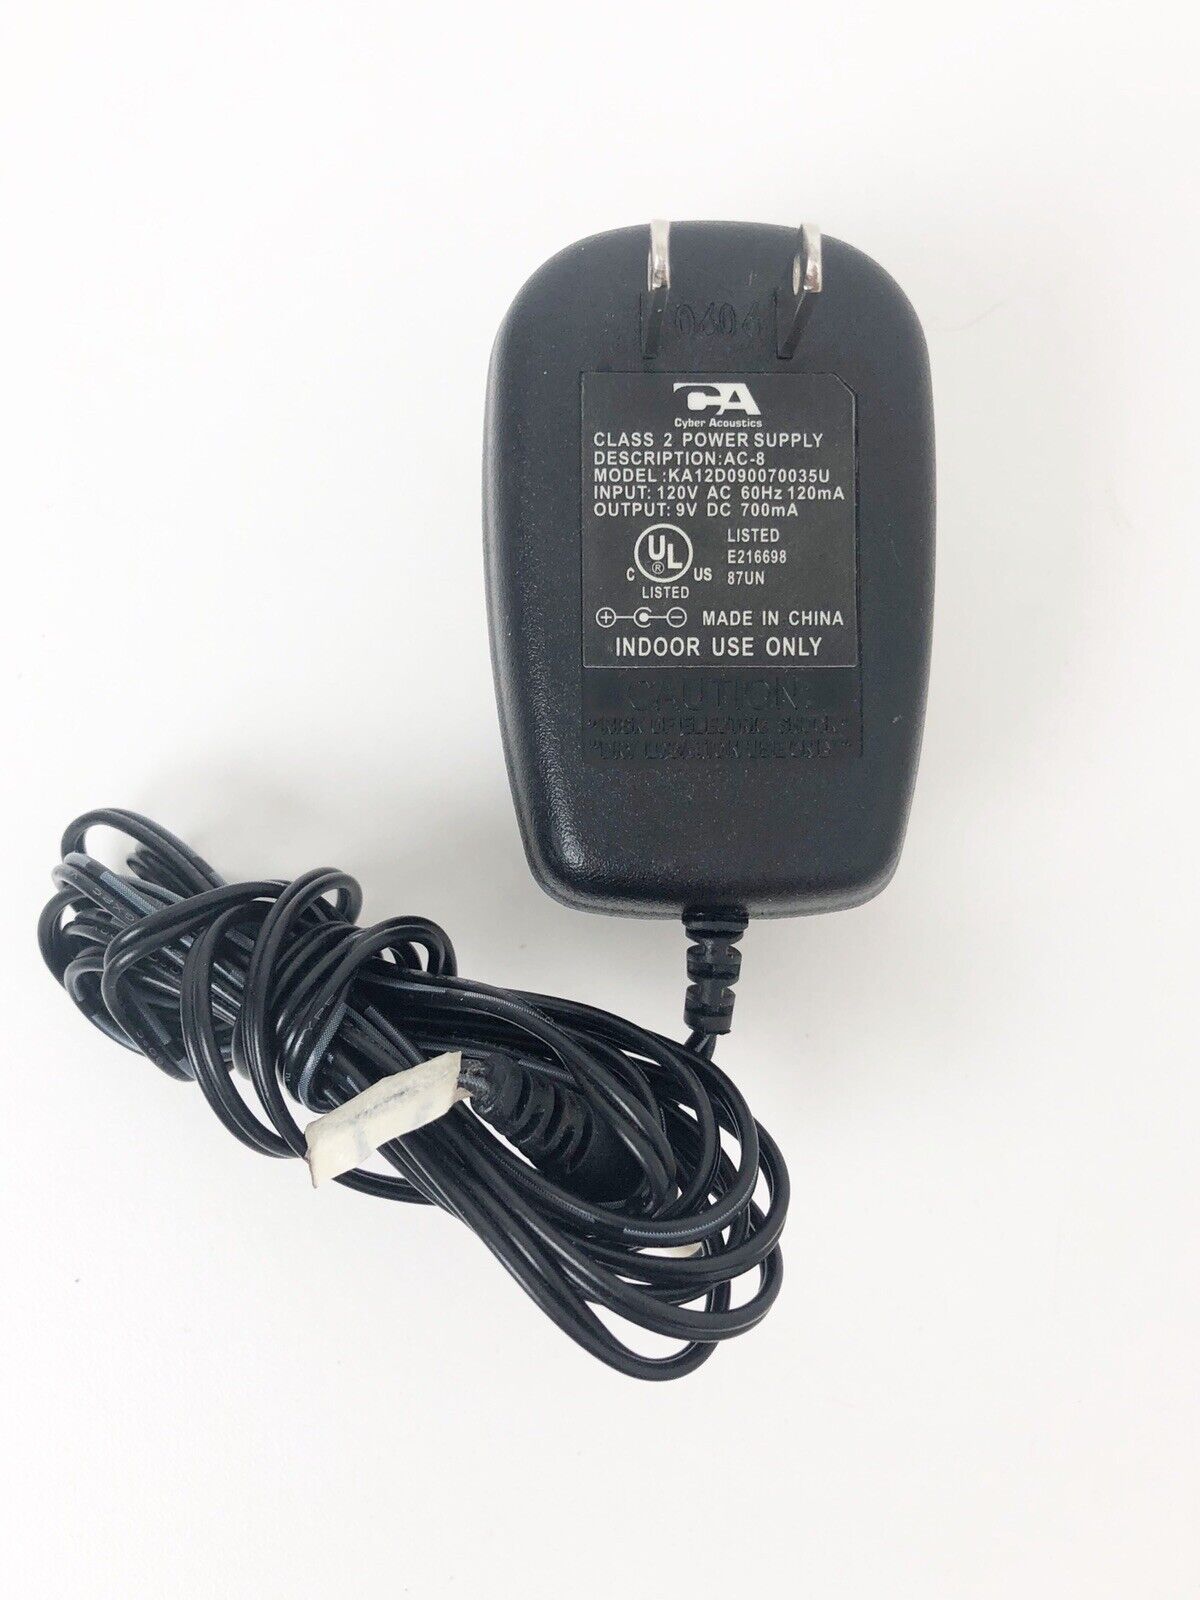 *Brand NEW* Charger 9 Volts 700mA Cyber Acoustics KA12D090070035u AC Adapter Power Supply